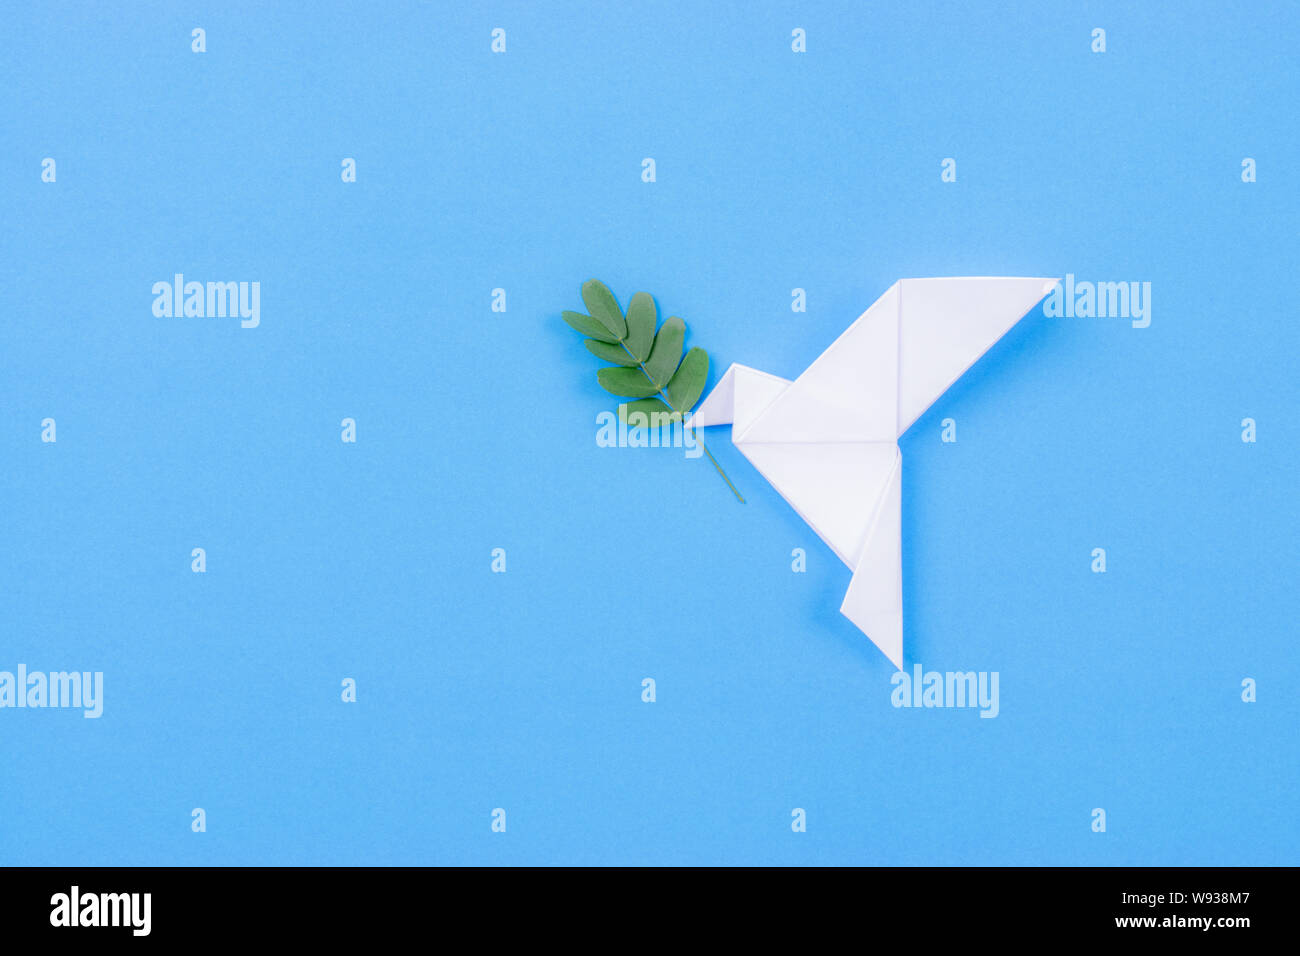 White dove made from paper carrying leaf branch. International day of peace. Stock Photo